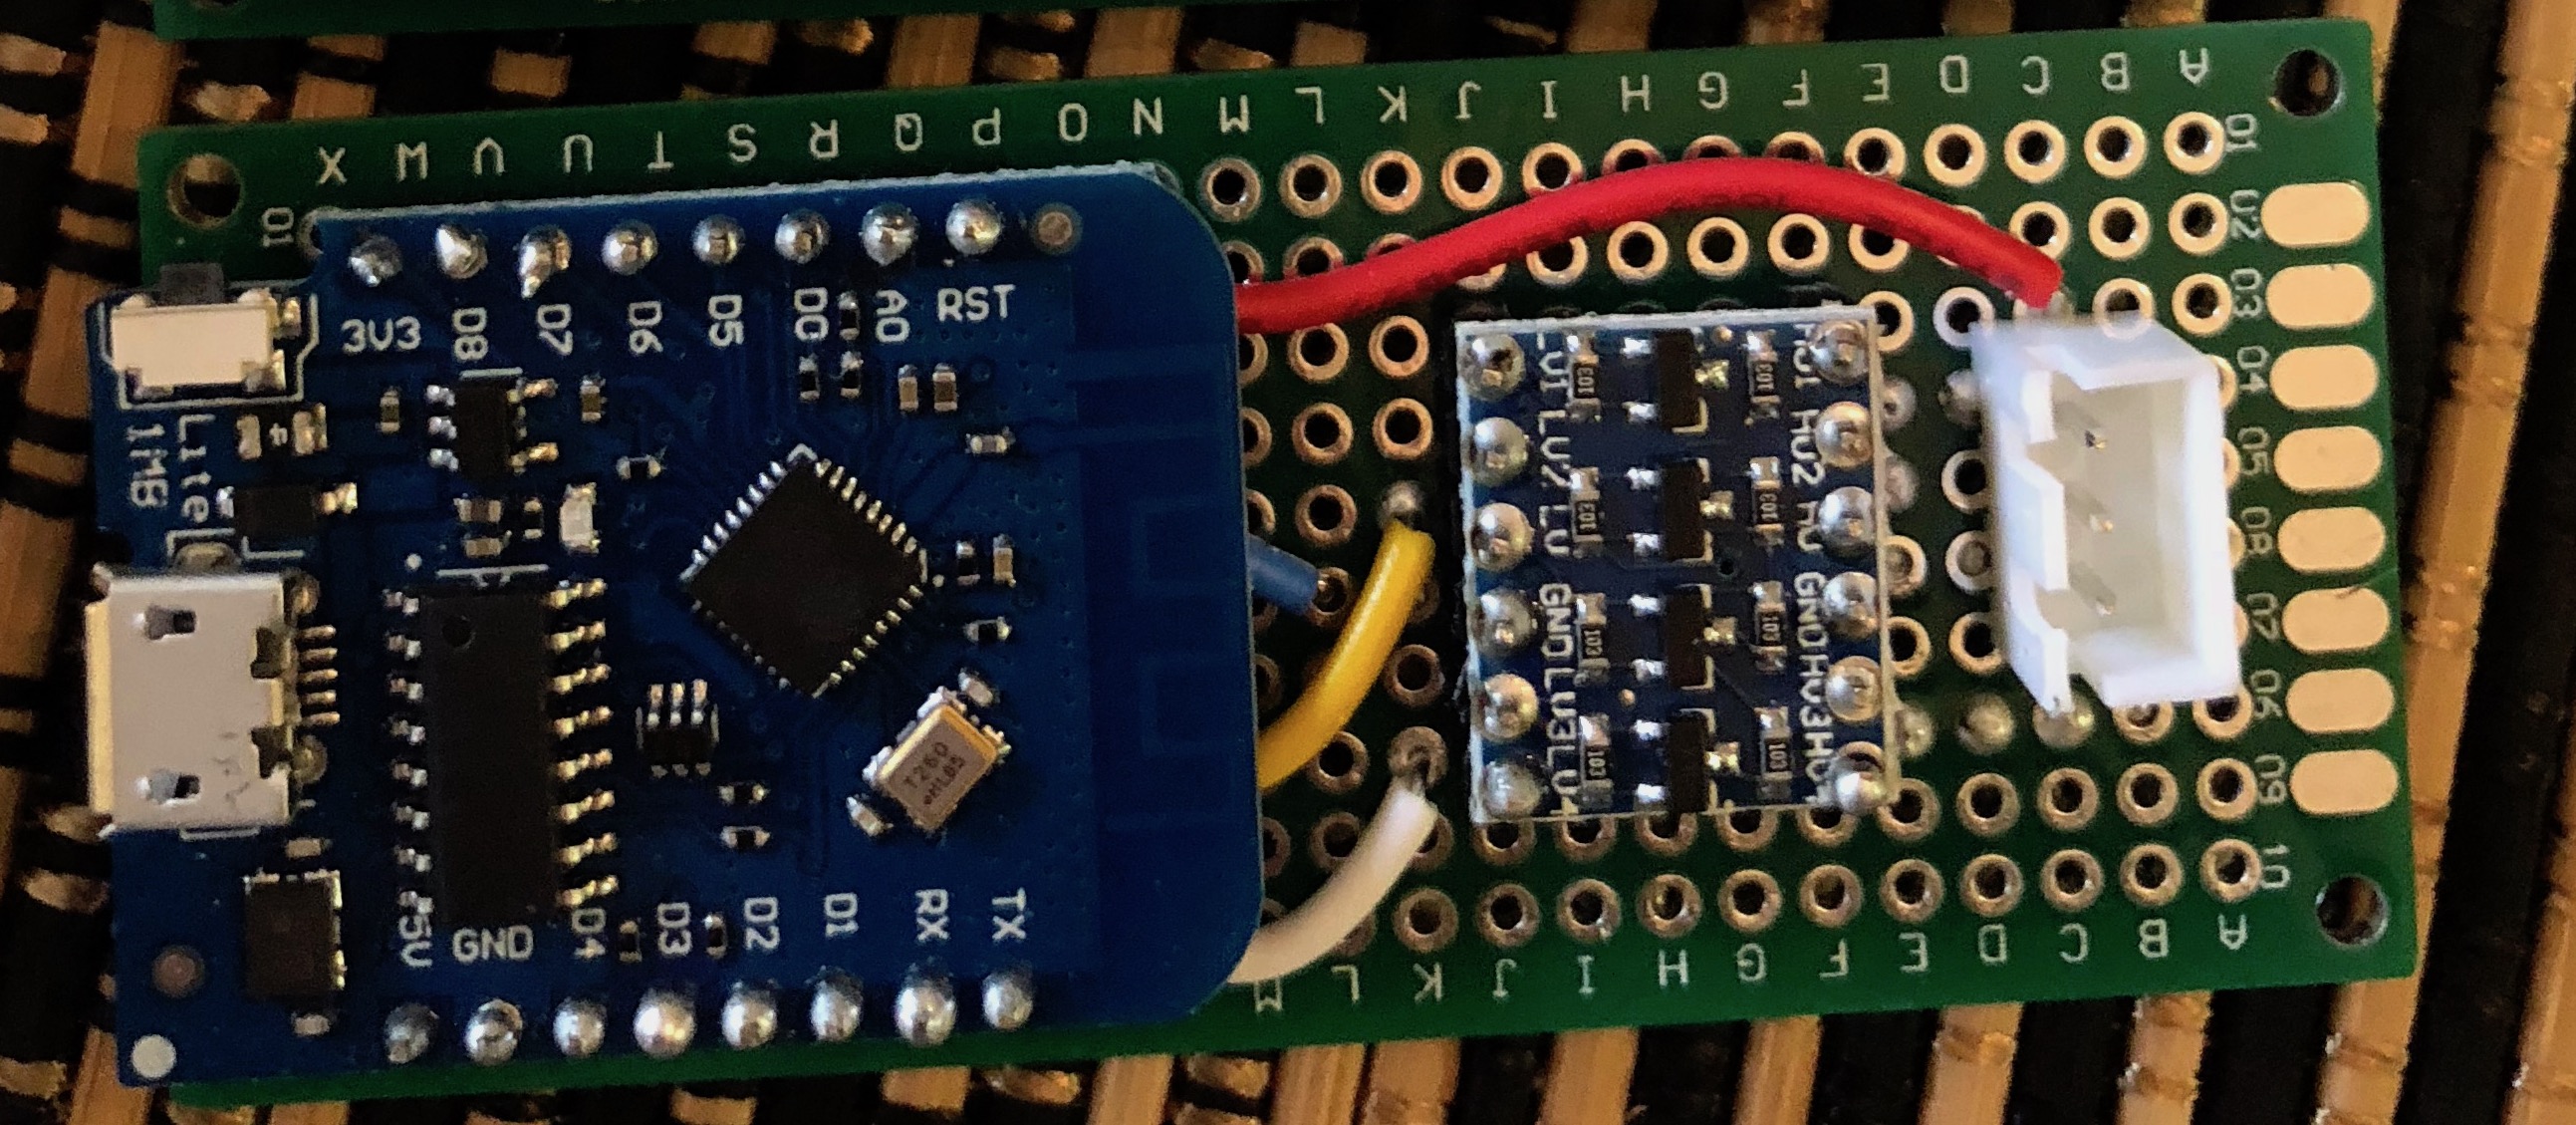 Controller on PCB